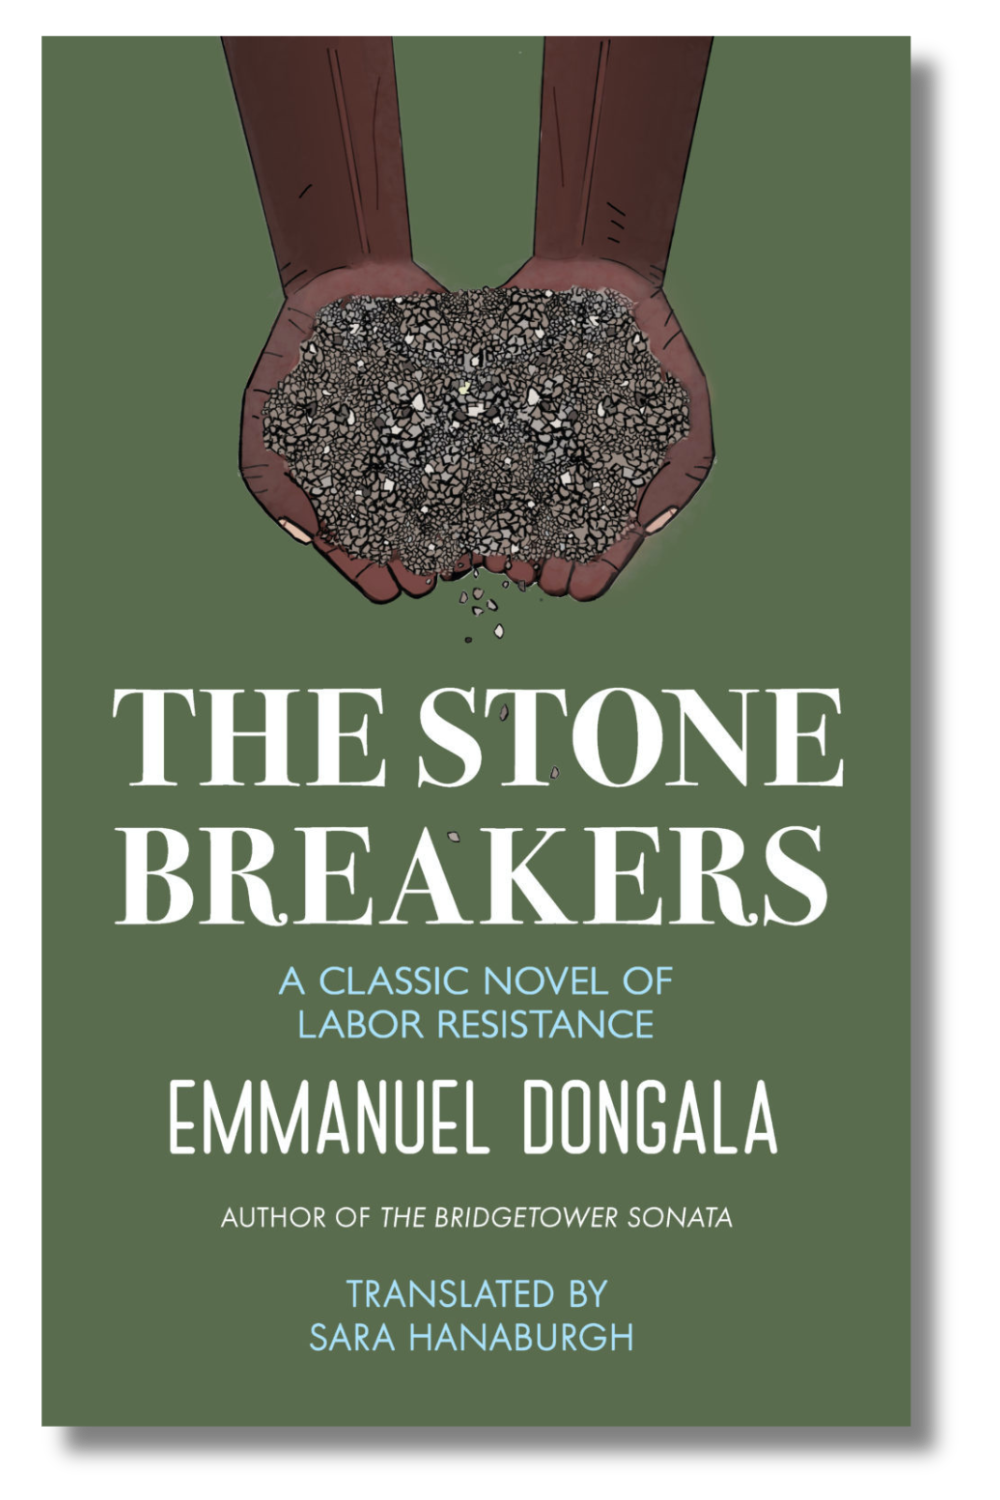 The cover of "The Stone Breakers" by Emmanual Dongala, translated by Sara Hanaburgh